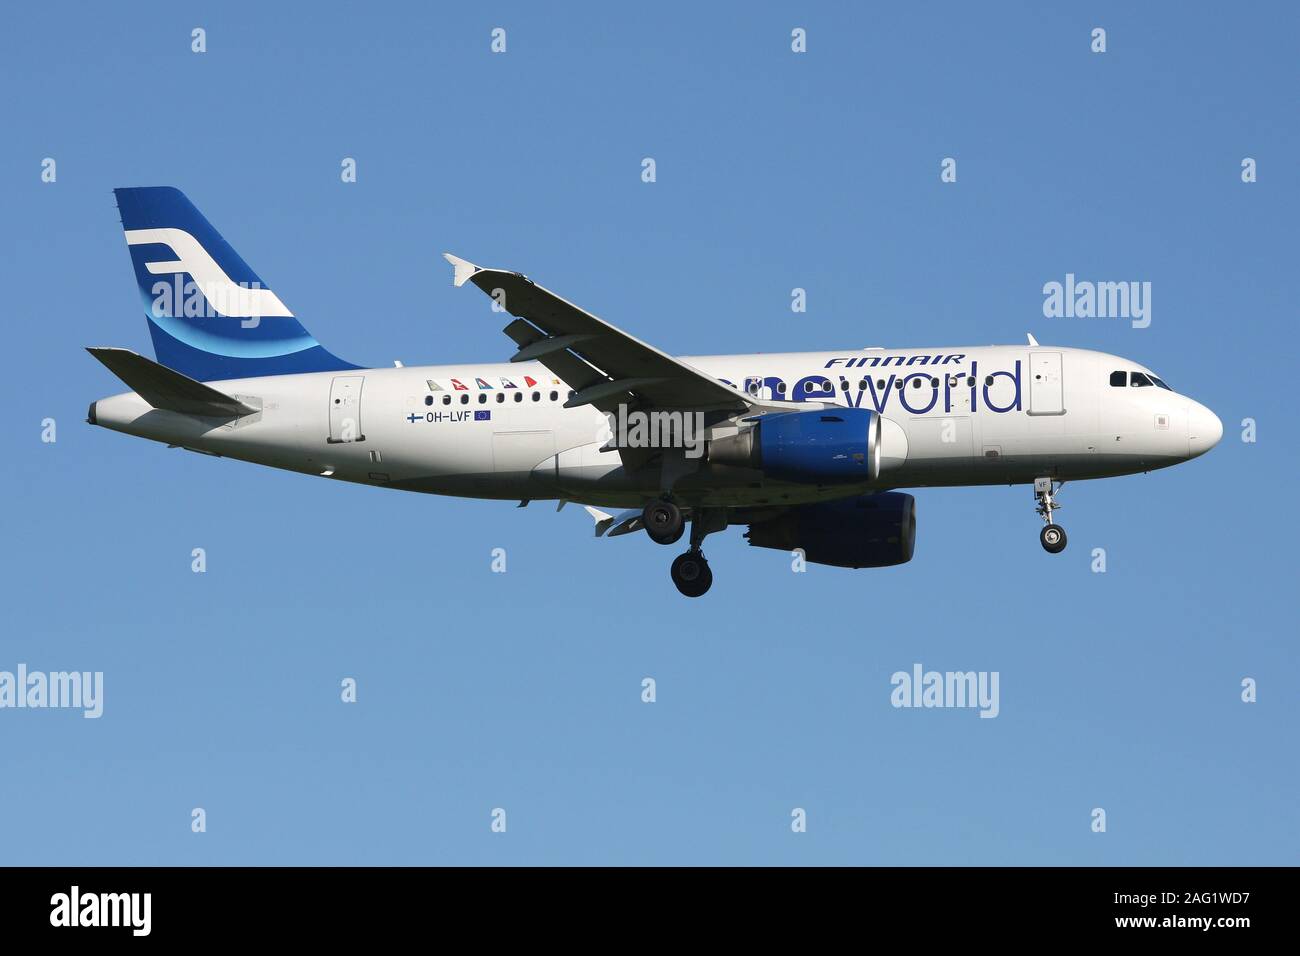 Finnair Airbus A319-100 in special oneworld alliance livery with ...